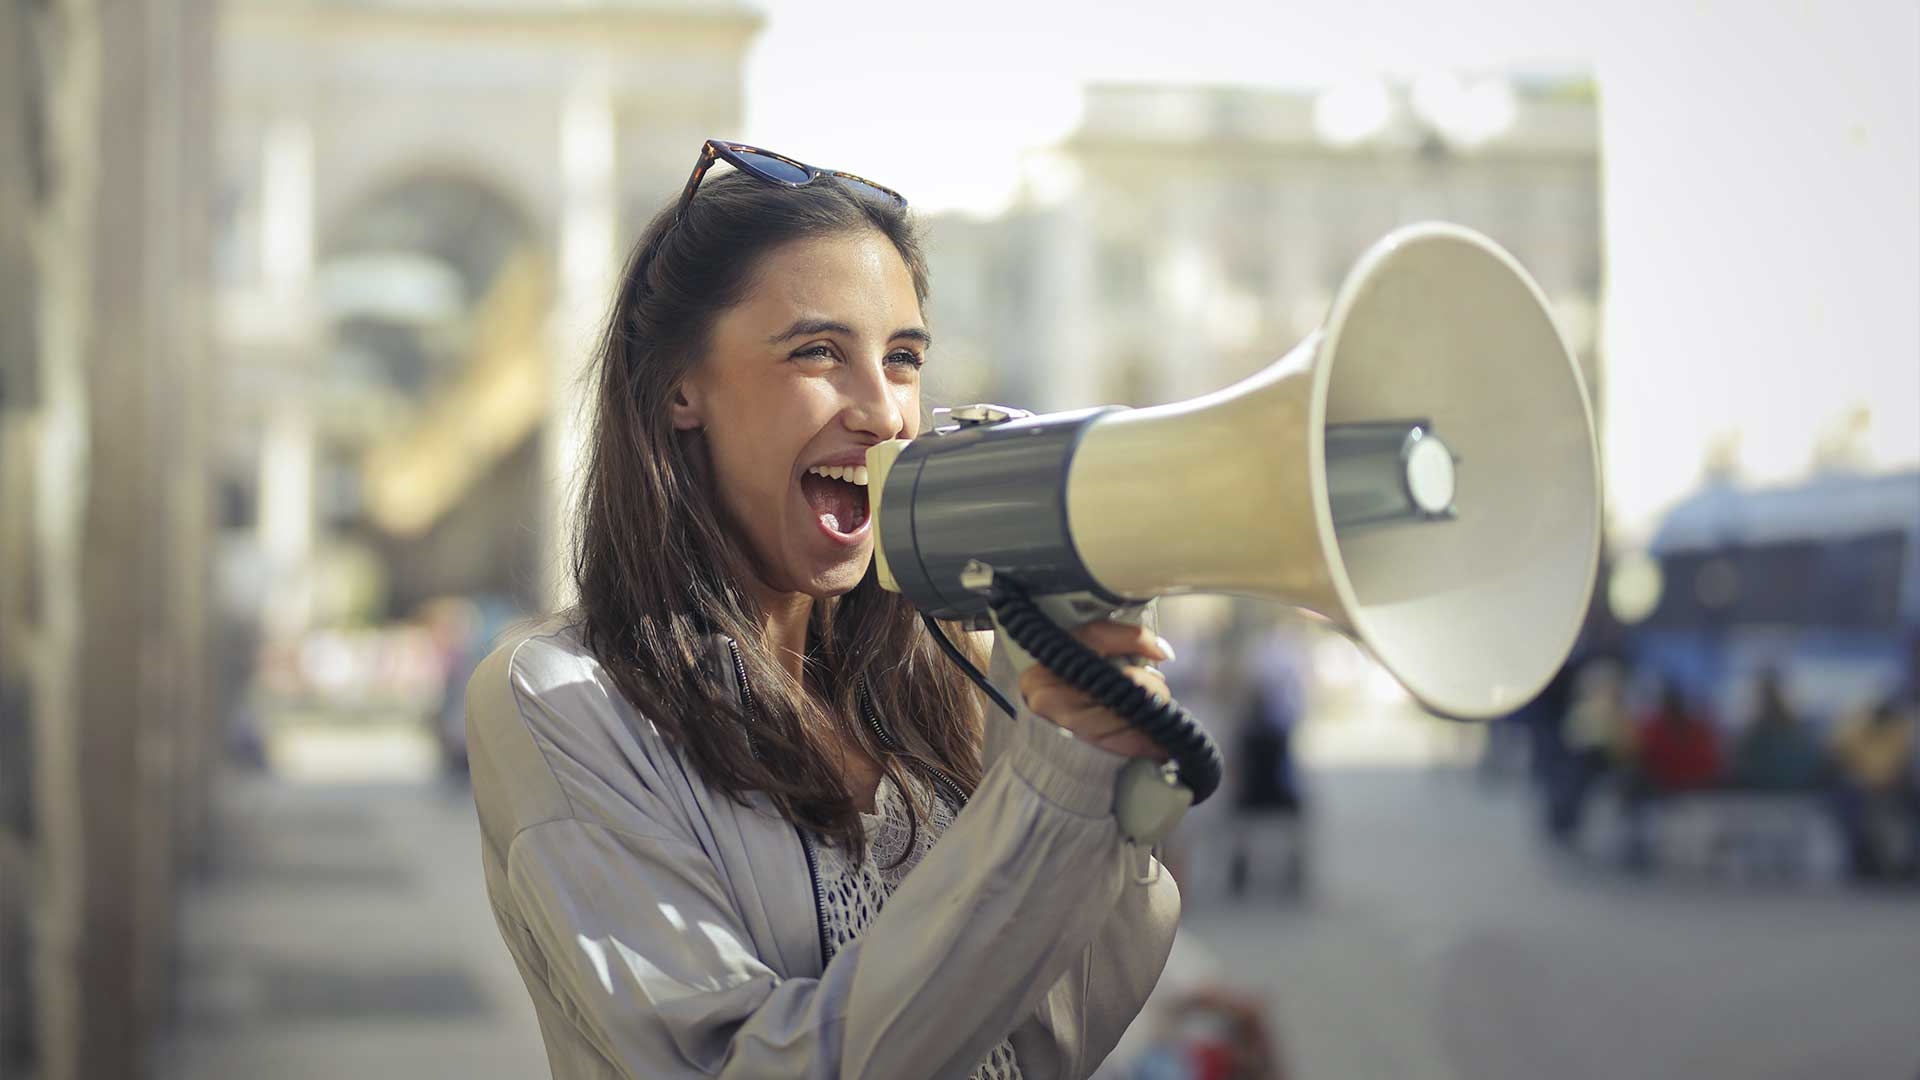 A student talking into a megaphone and smiling